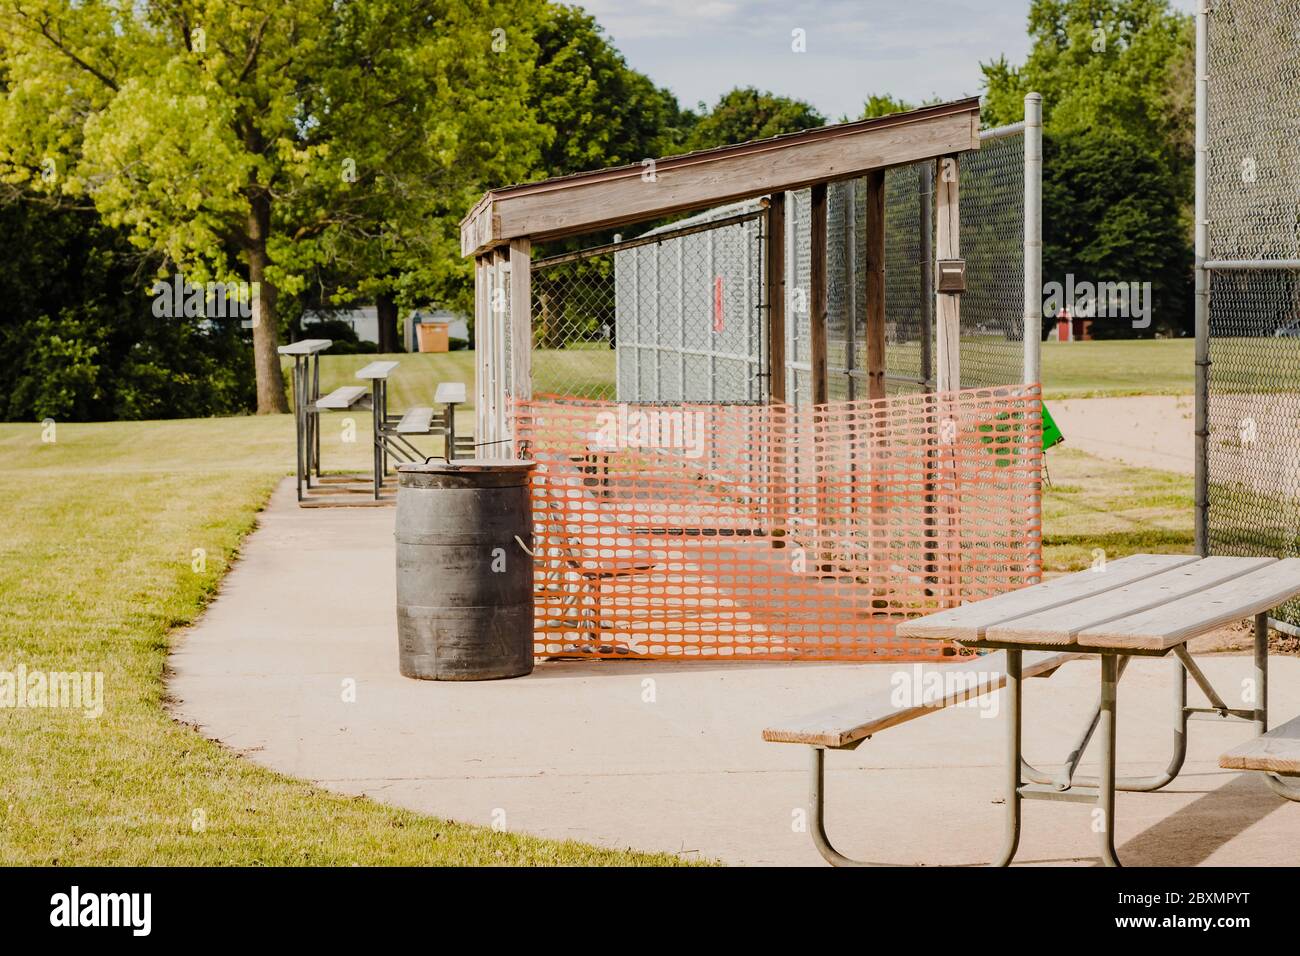 the dugouts on this baseball field are closed by city order in this city park field Stock Photo